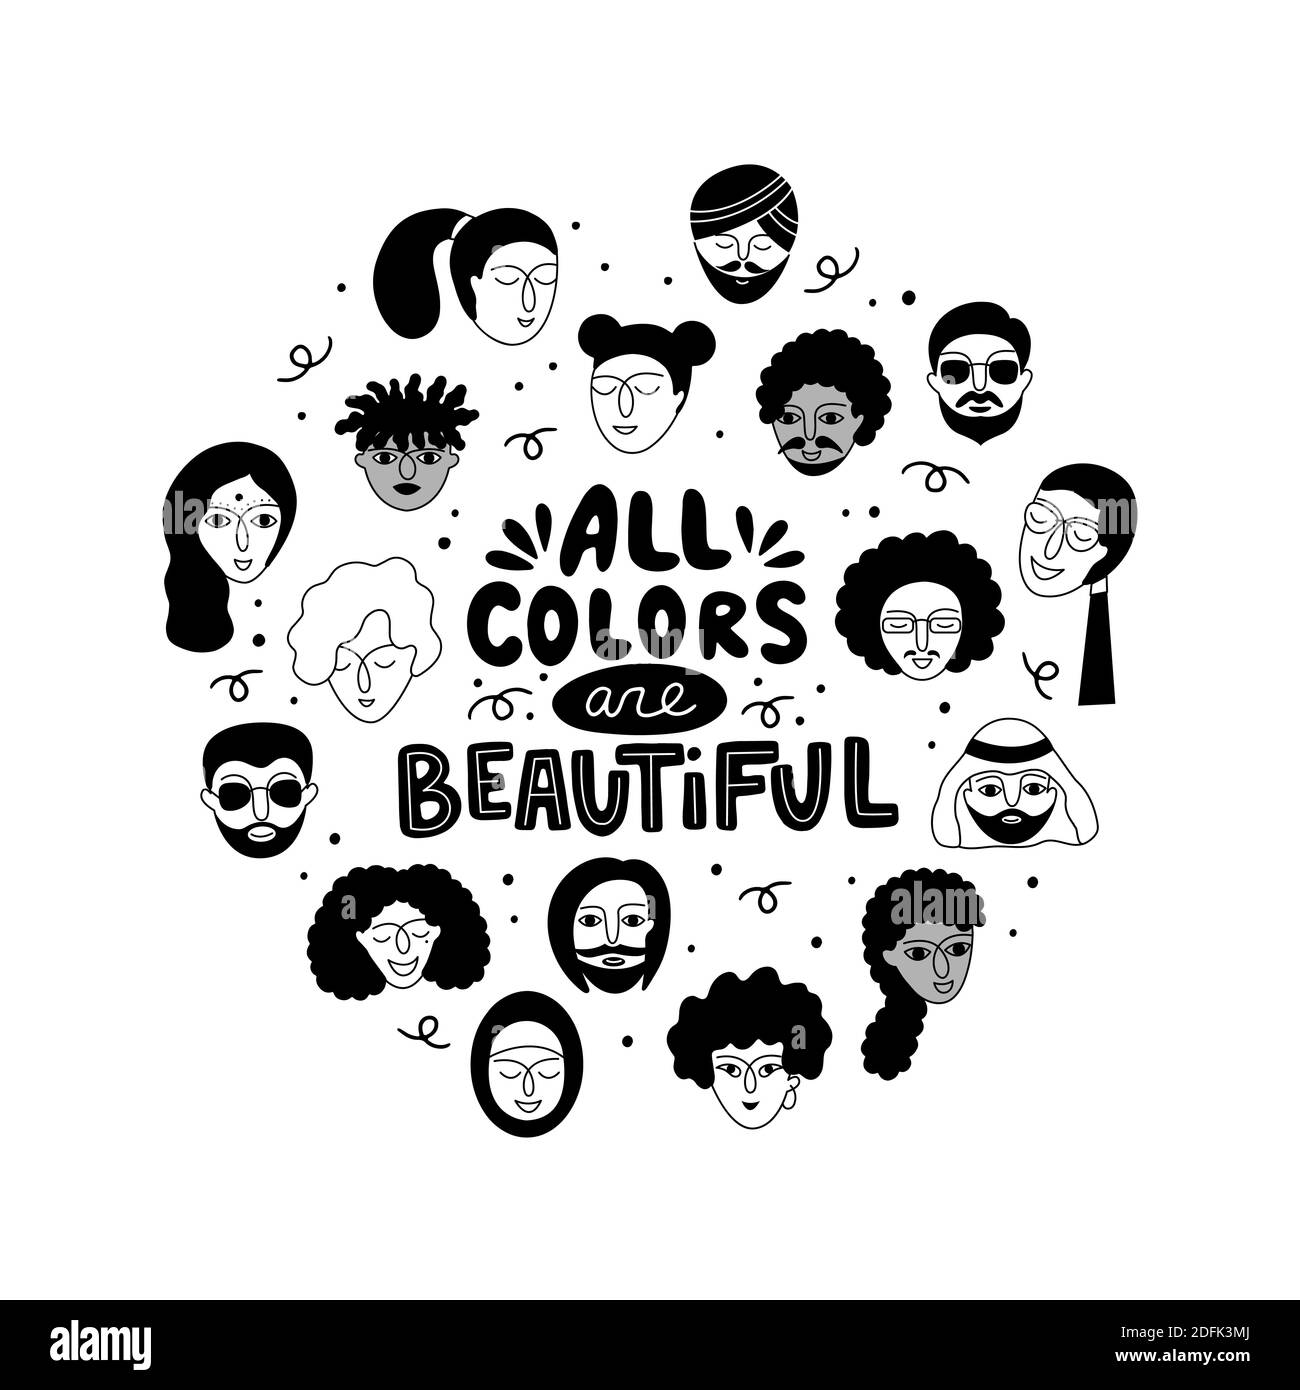 All colors are beautiful lettering. Multicultural group of people and a phrase in a round frame. Stock Vector